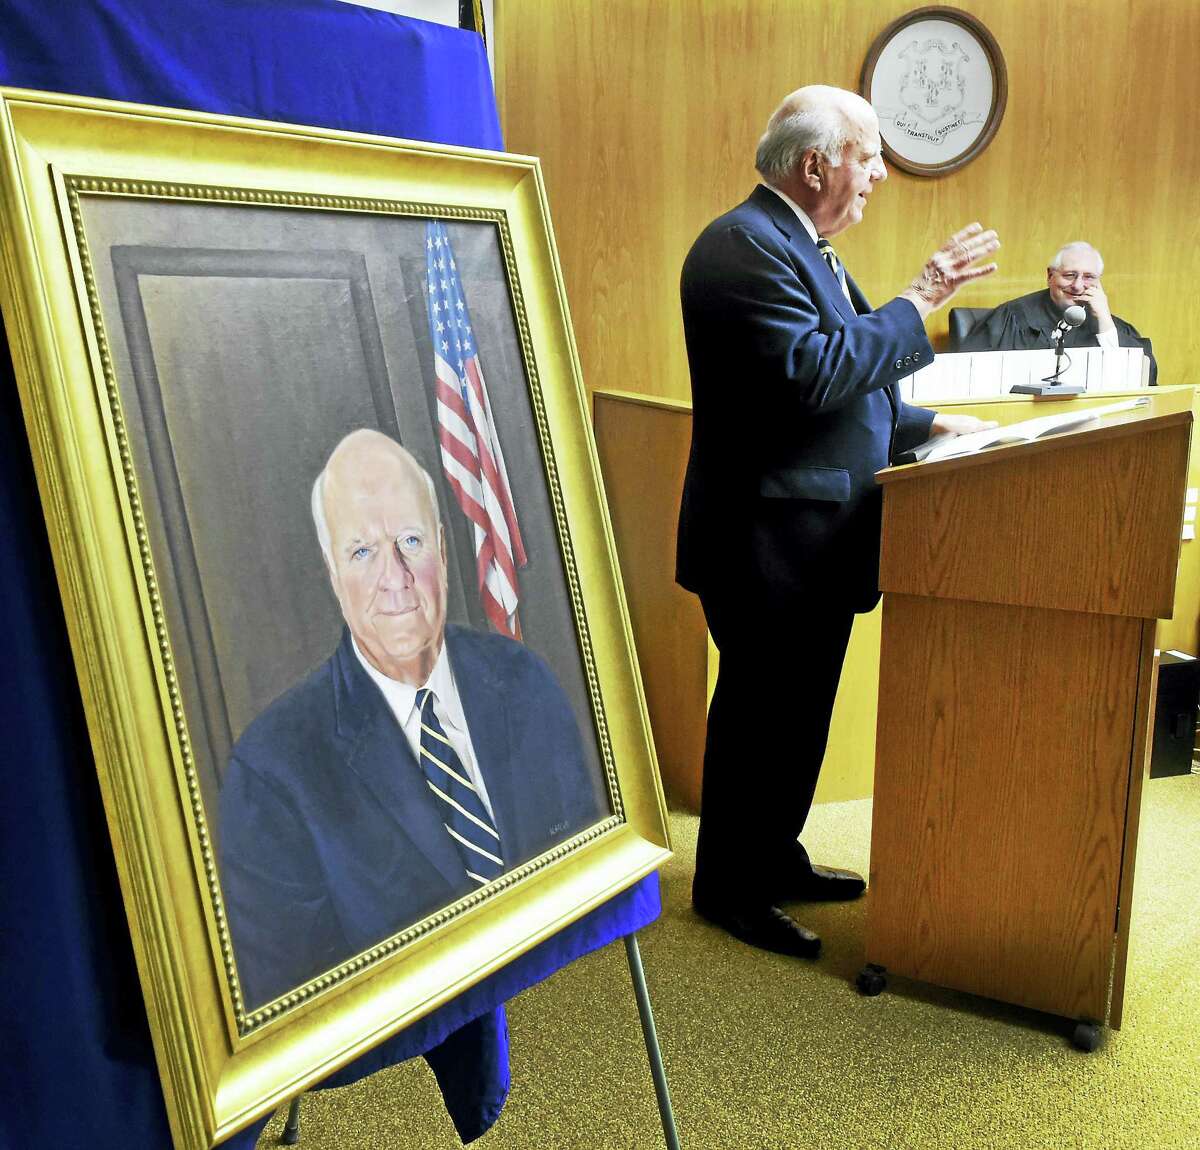 (Peter Hvizdak - New Haven Register) Judge Joseph P. Flynn, retired Chief Judge of the Appellate Court, Judge of the Appellate Court and Superior Court Judge, addresses well-wishers after the unveiling of his portrait at the Derby Superior Court house in Derby Tuesday, January 5, 2016. Administrative Judge Frank A. Iannotti, right, presided over the event. The portrait was commissioned in recognition of Flynn's record of distinguished service as a jurist by the Lower Naugatuck Valley Bar Association.